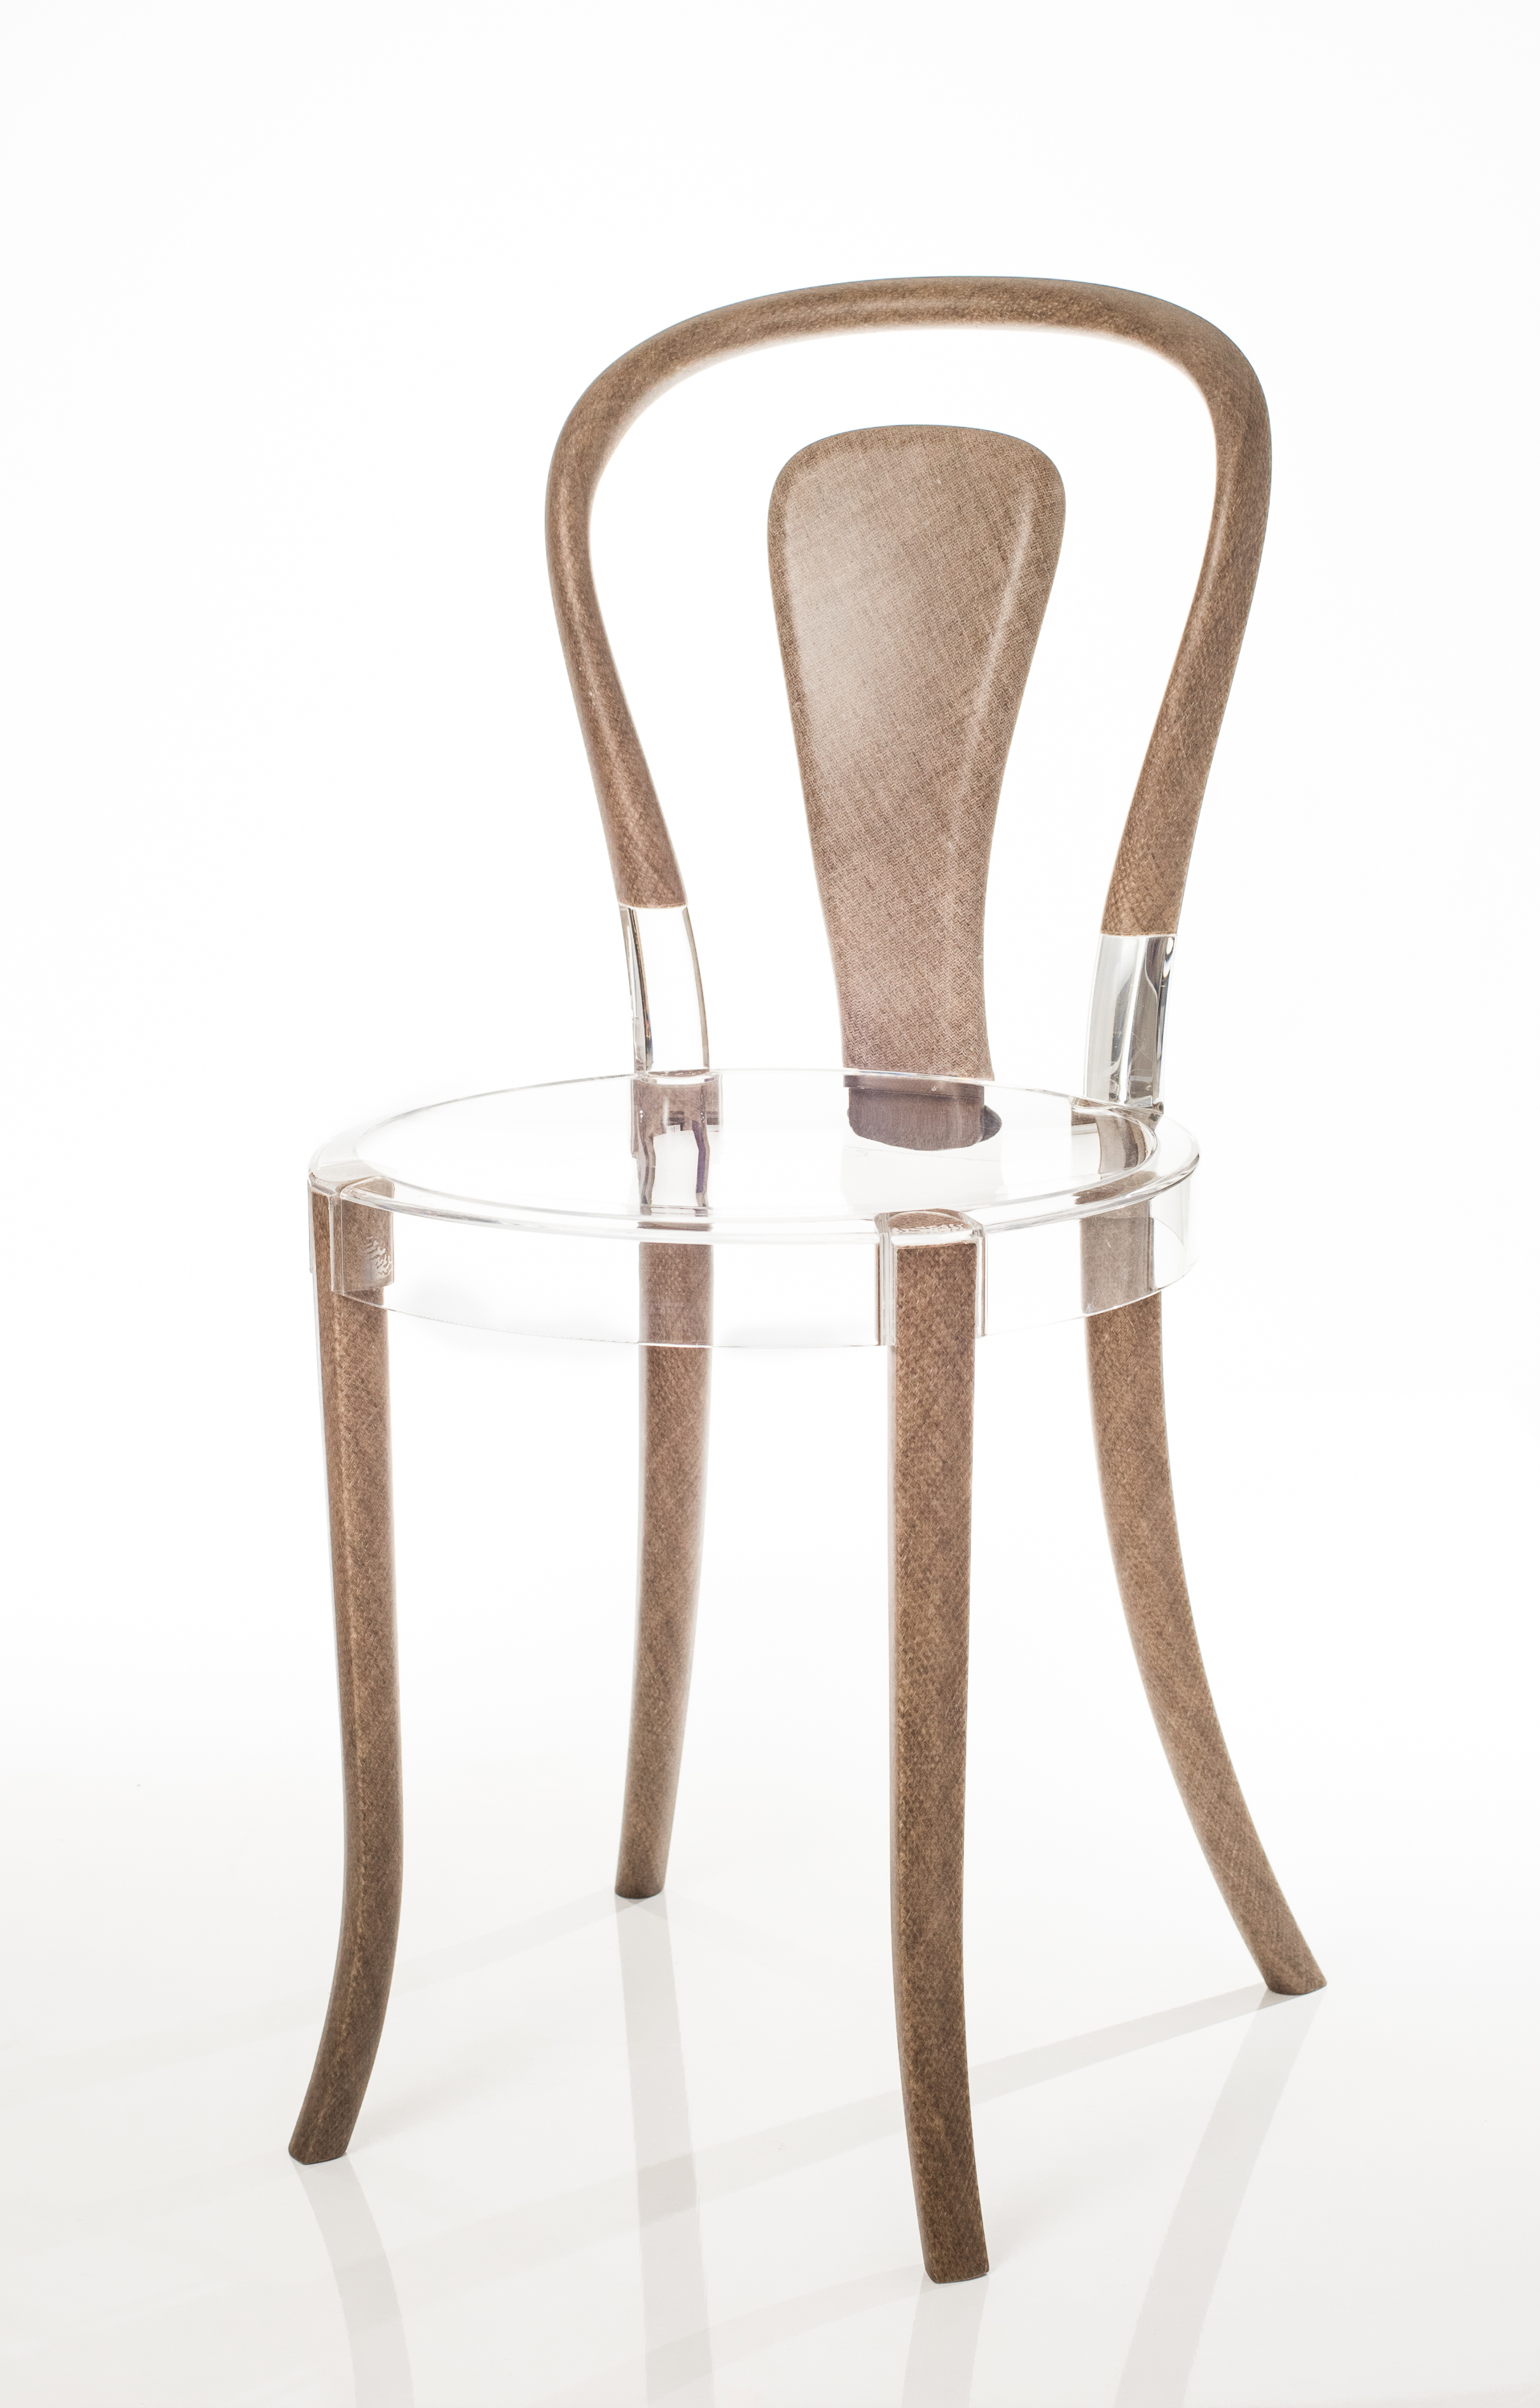 Revology’s design is the first chair to be made out of flax-fiber tubes and bio-based materials.